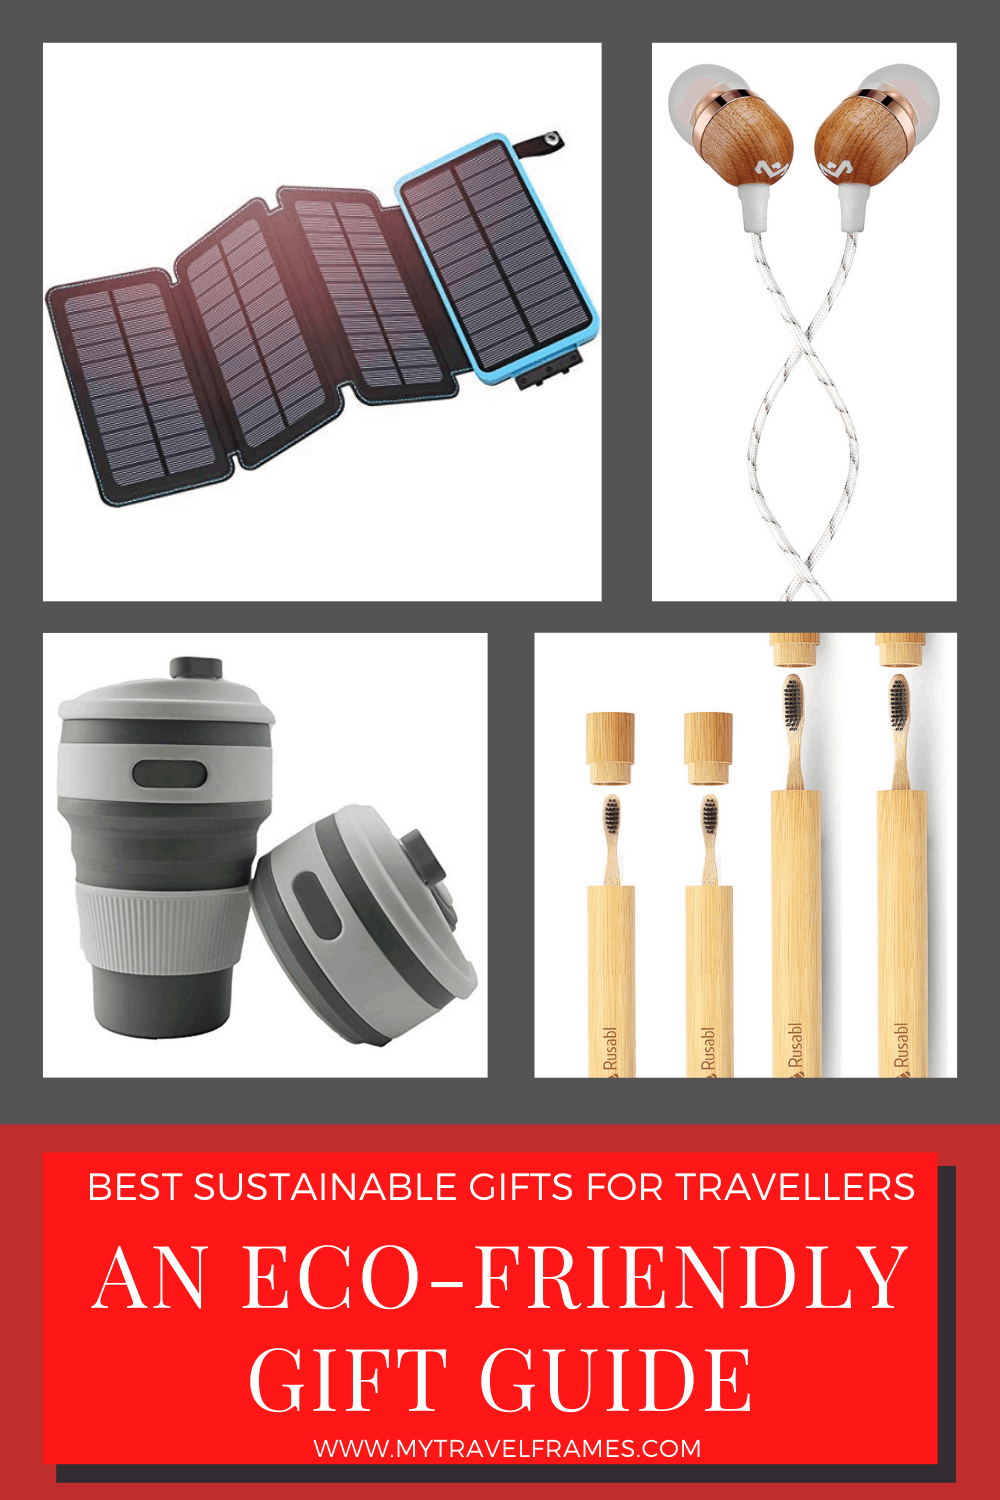 25 Sustainable Gifts for Travelers - Eco-Friendly Gifts Guide